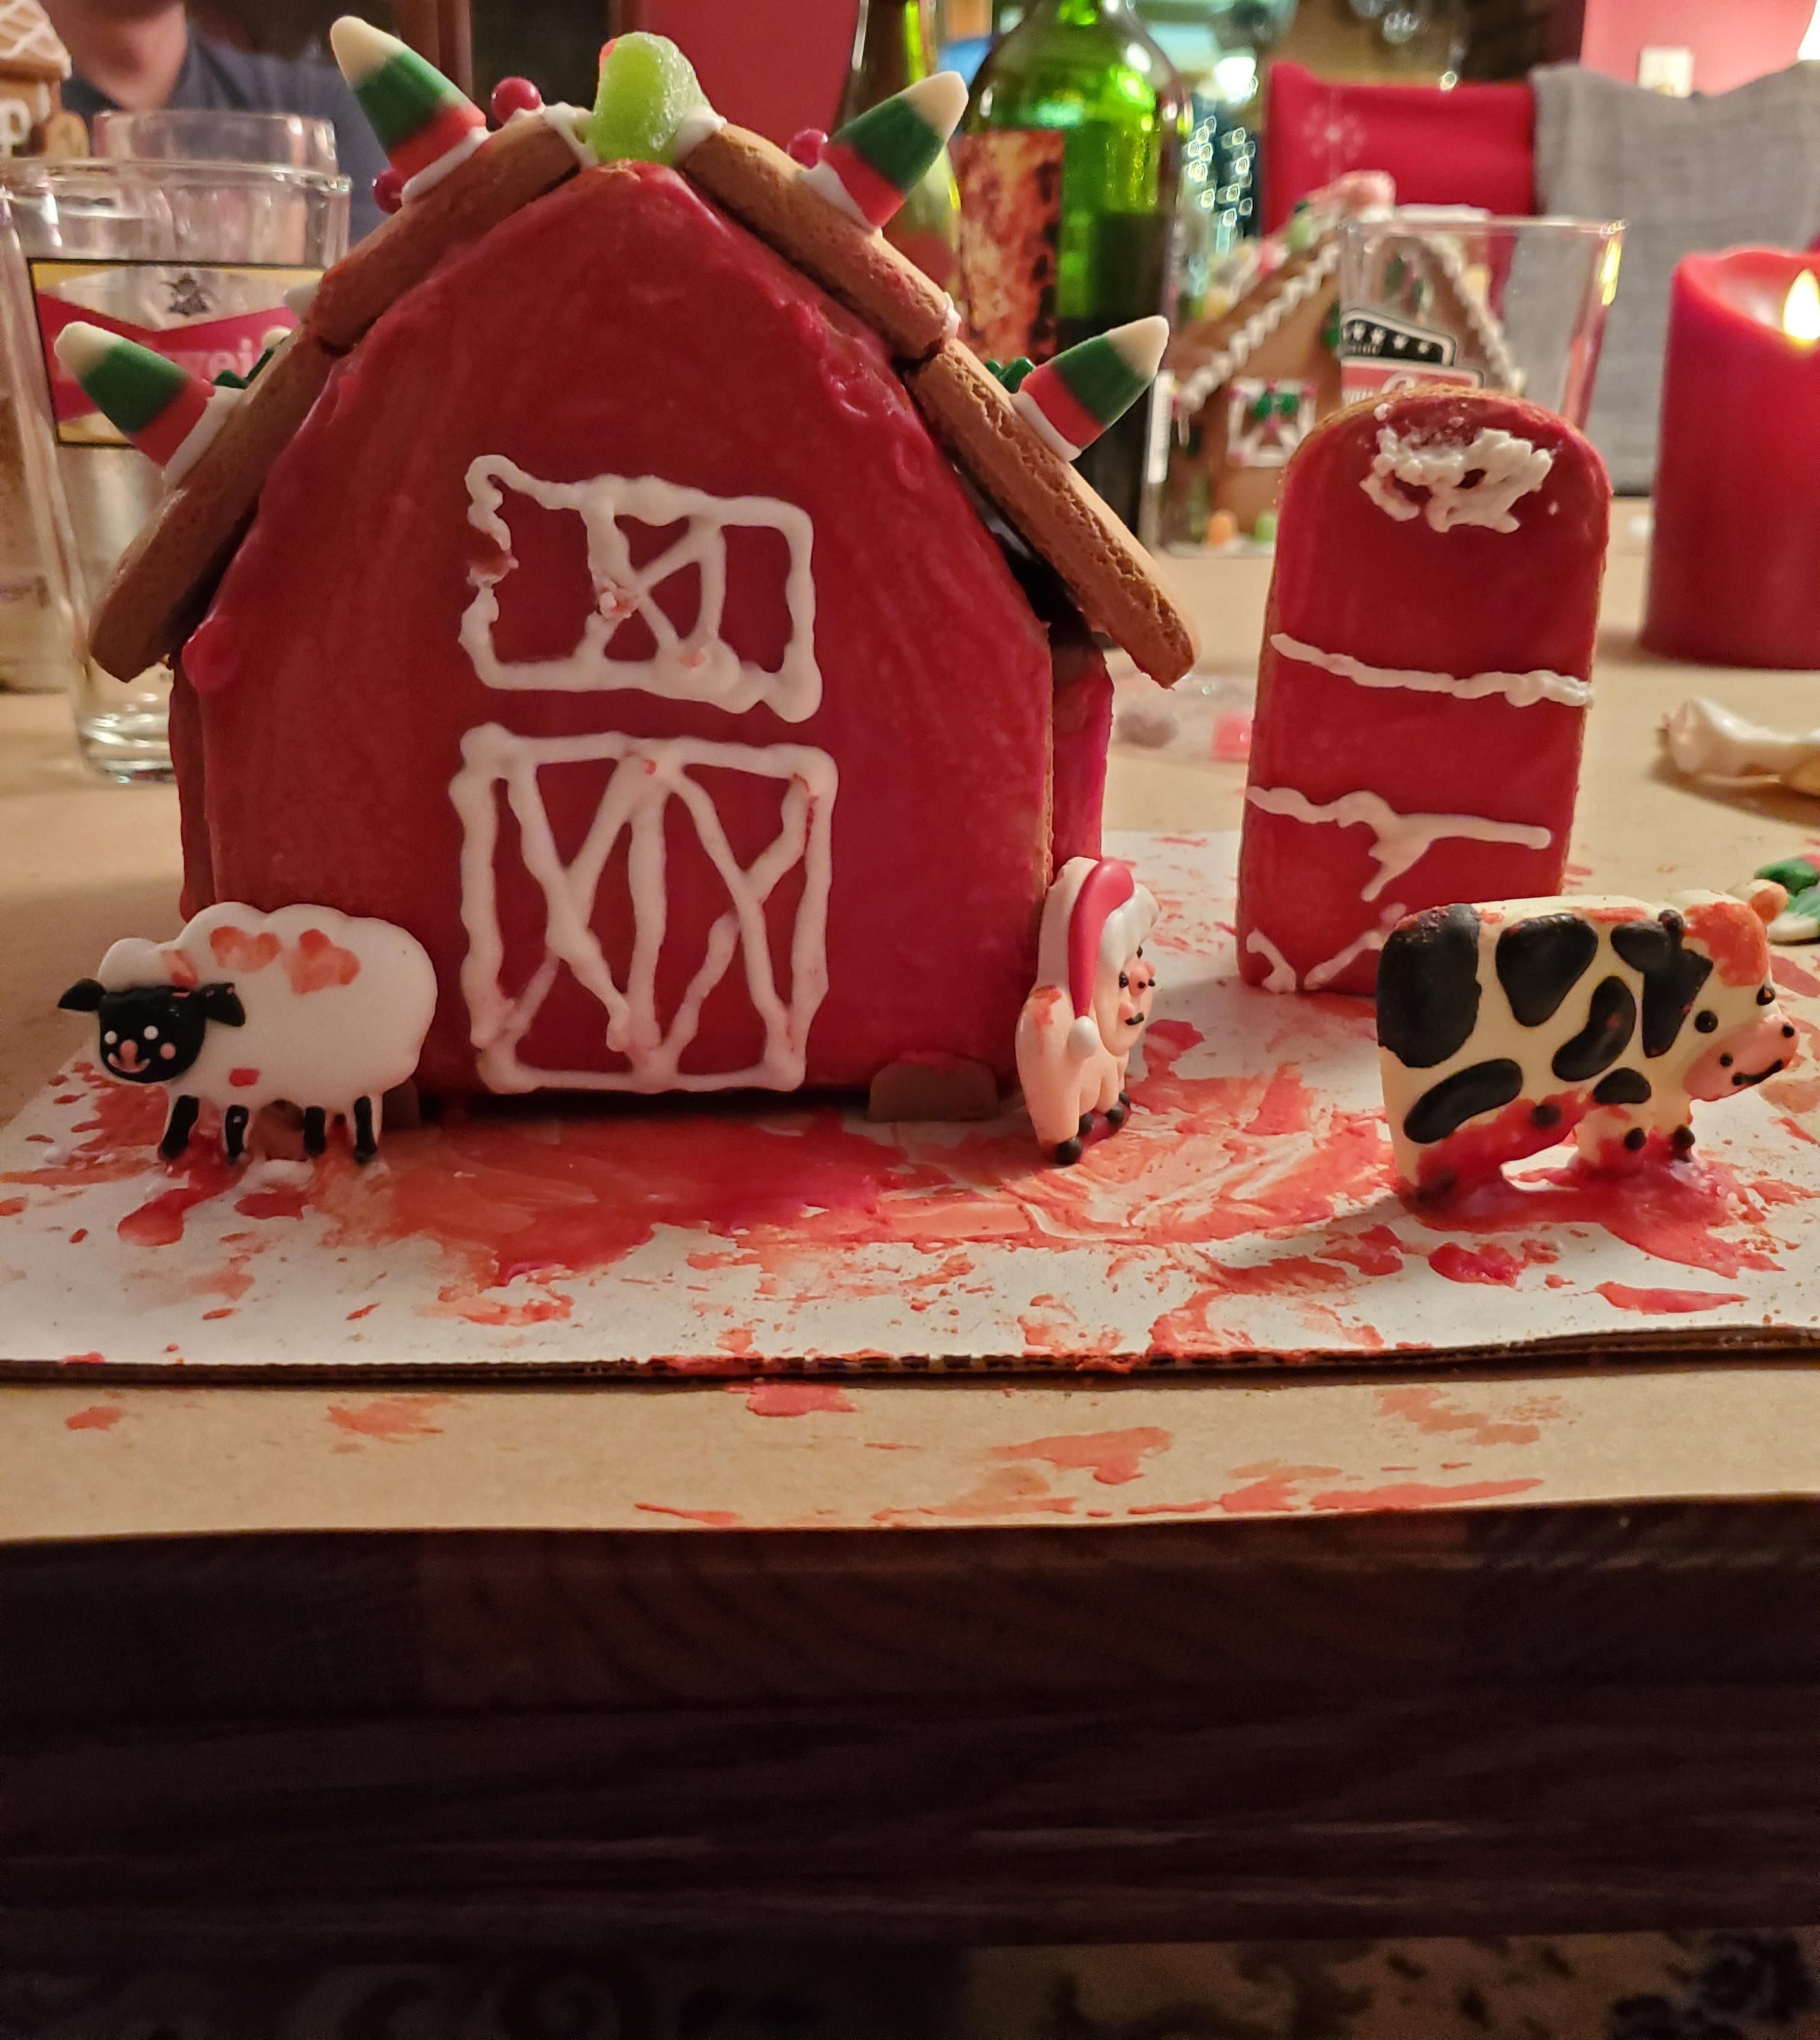 I really struggled with the icing for my gingerbread barn and it accidentally became a gingerbread slaughterhouse.